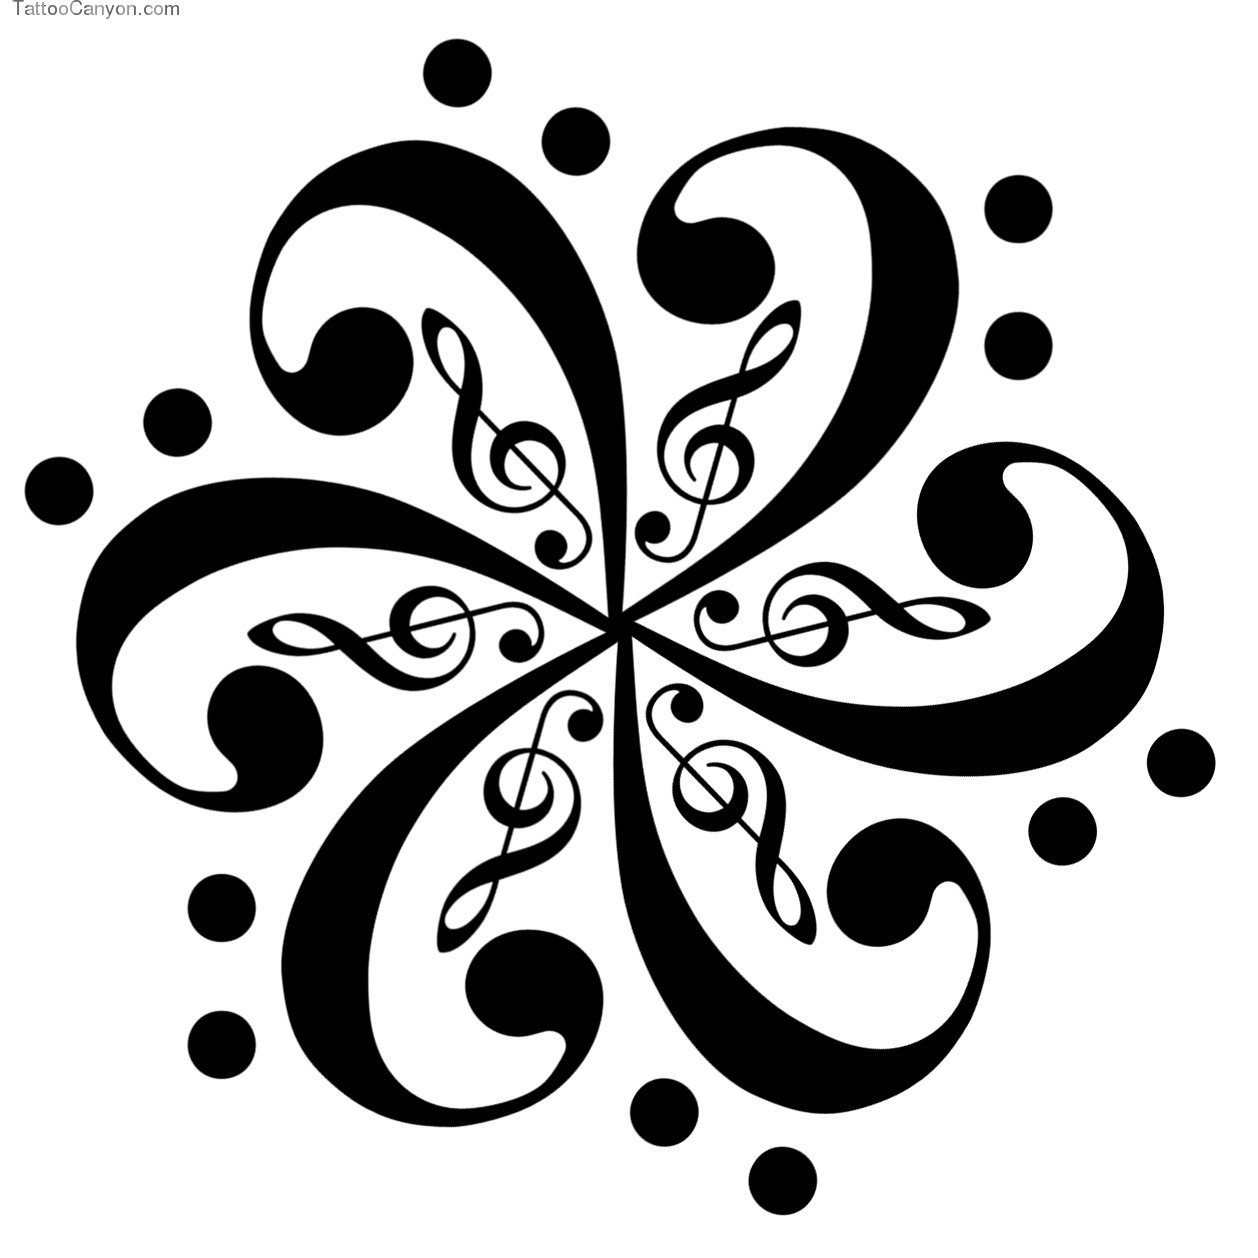 Tattoo Designs Tattoos Music Symbol Tribal Note Picture ...